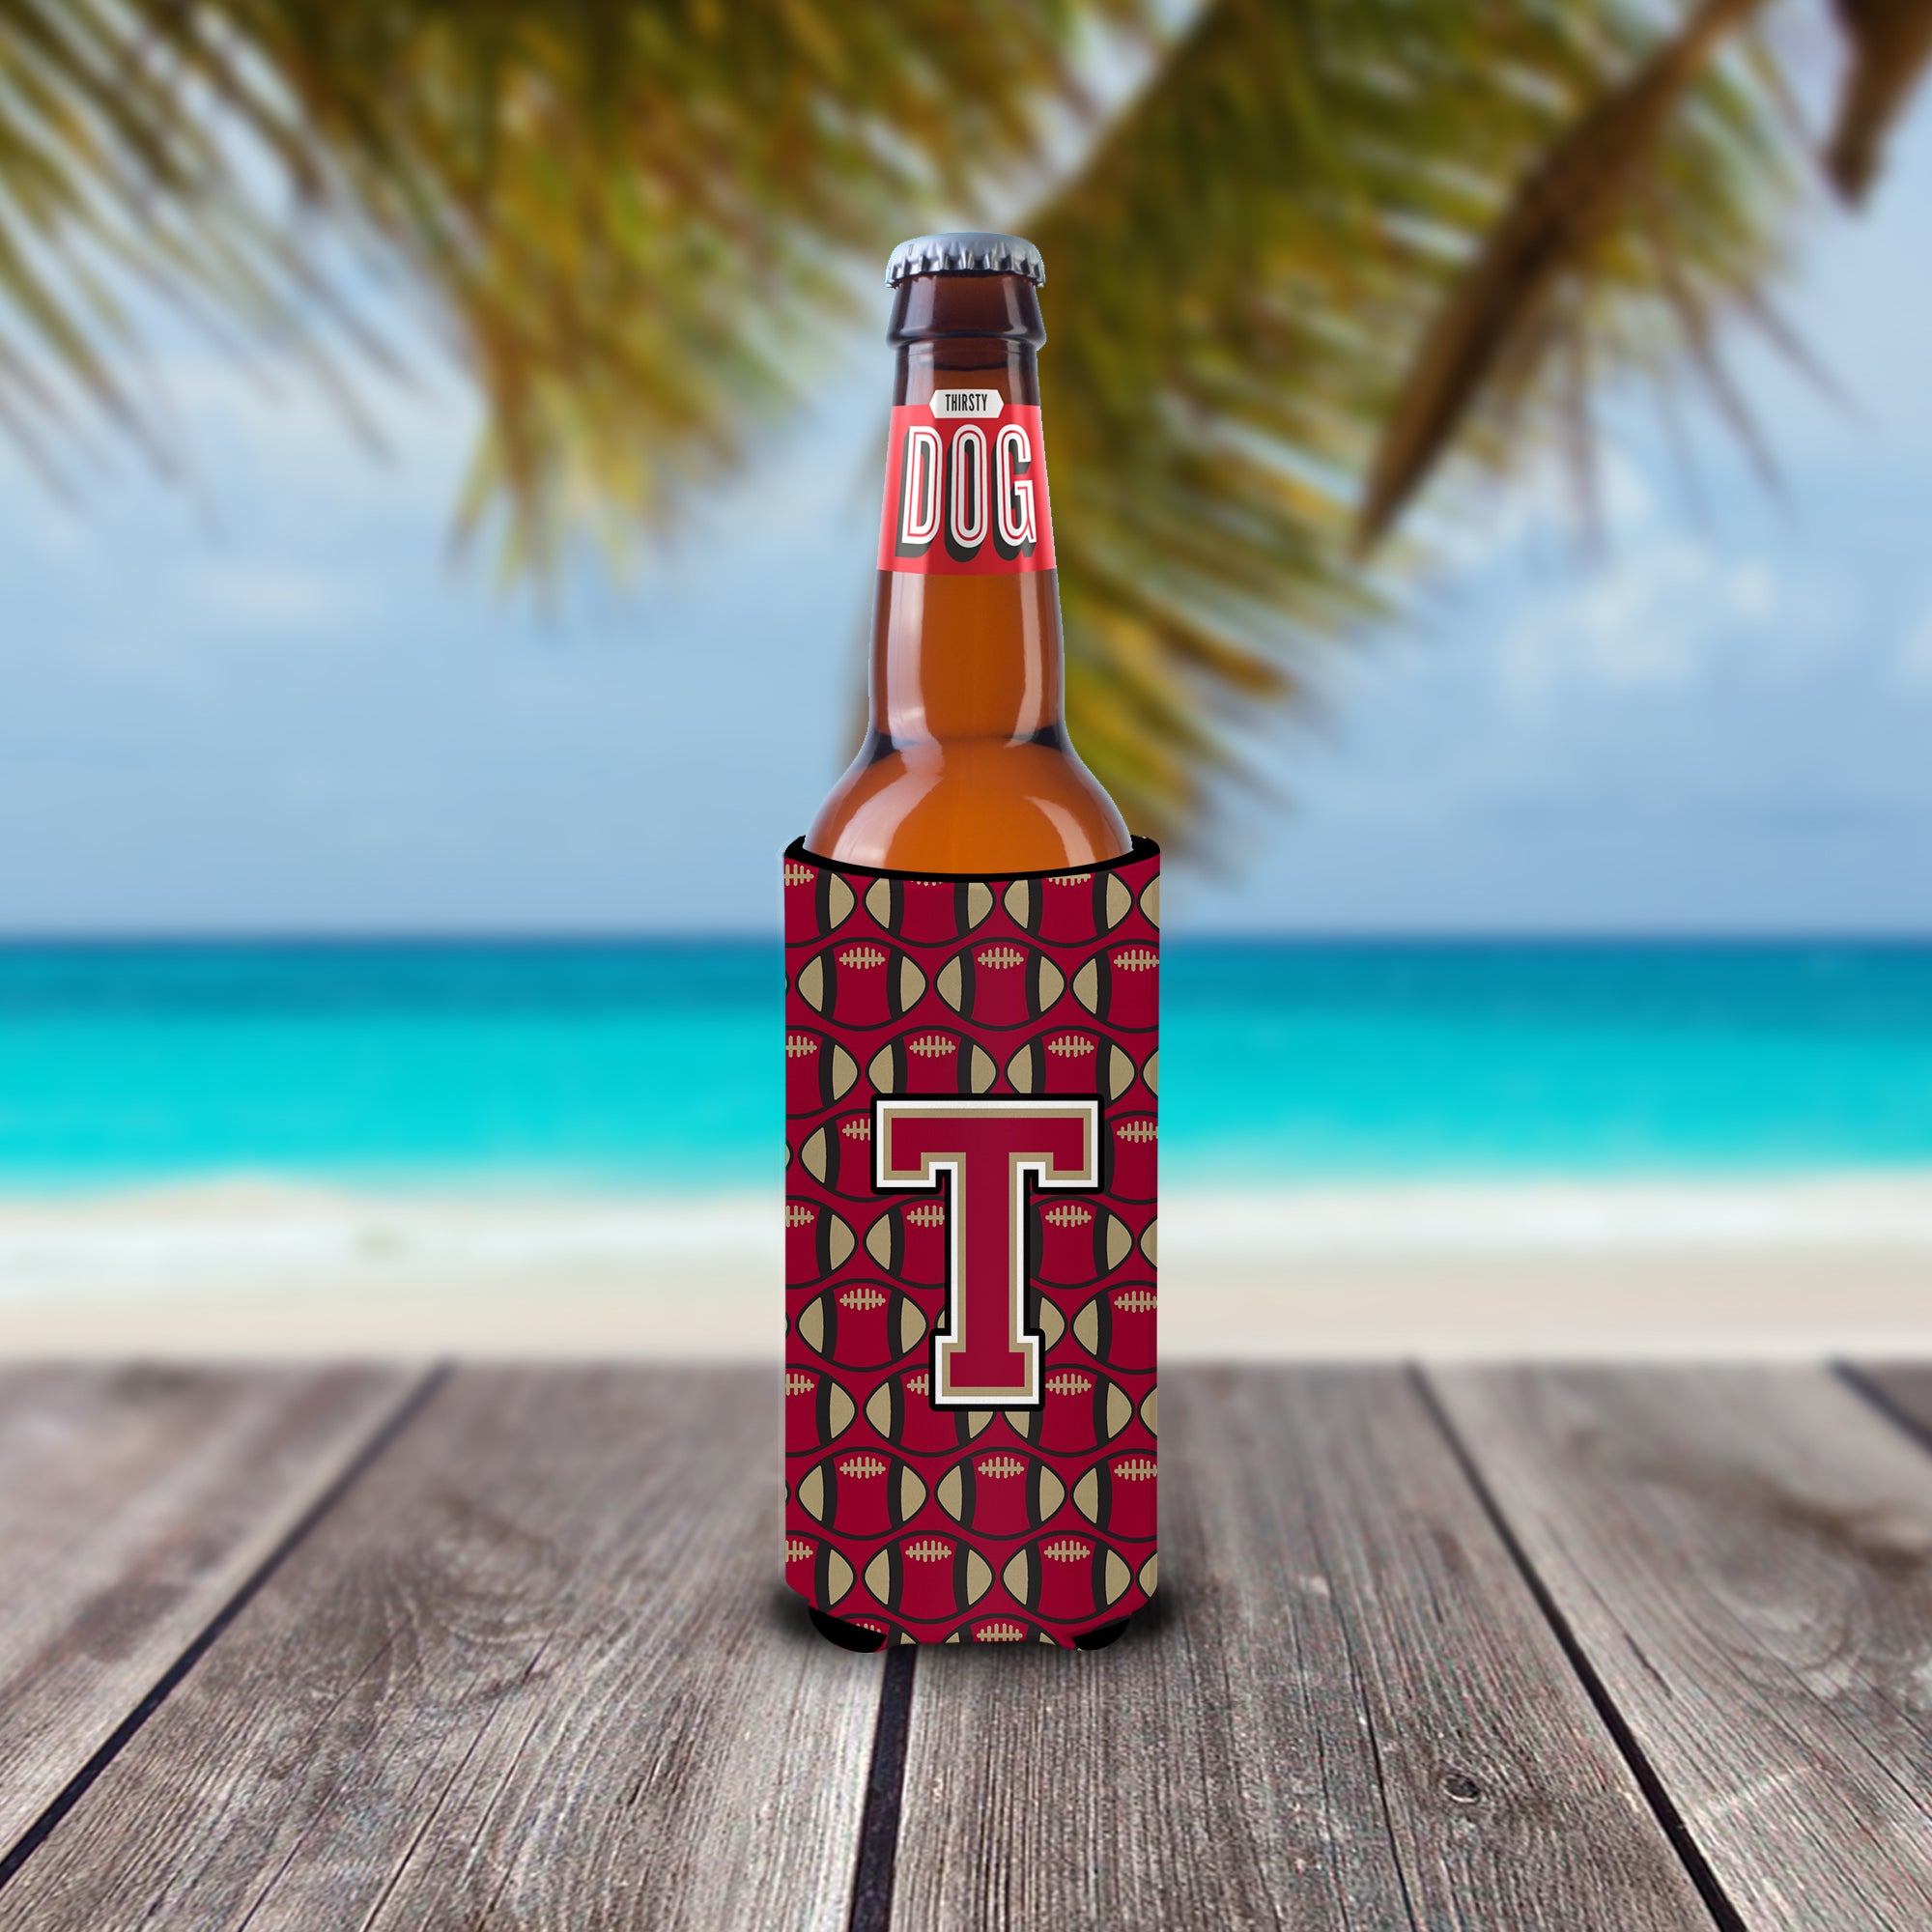 Letter T Football Garnet and Gold Ultra Beverage Insulators for slim cans CJ1078-TMUK.